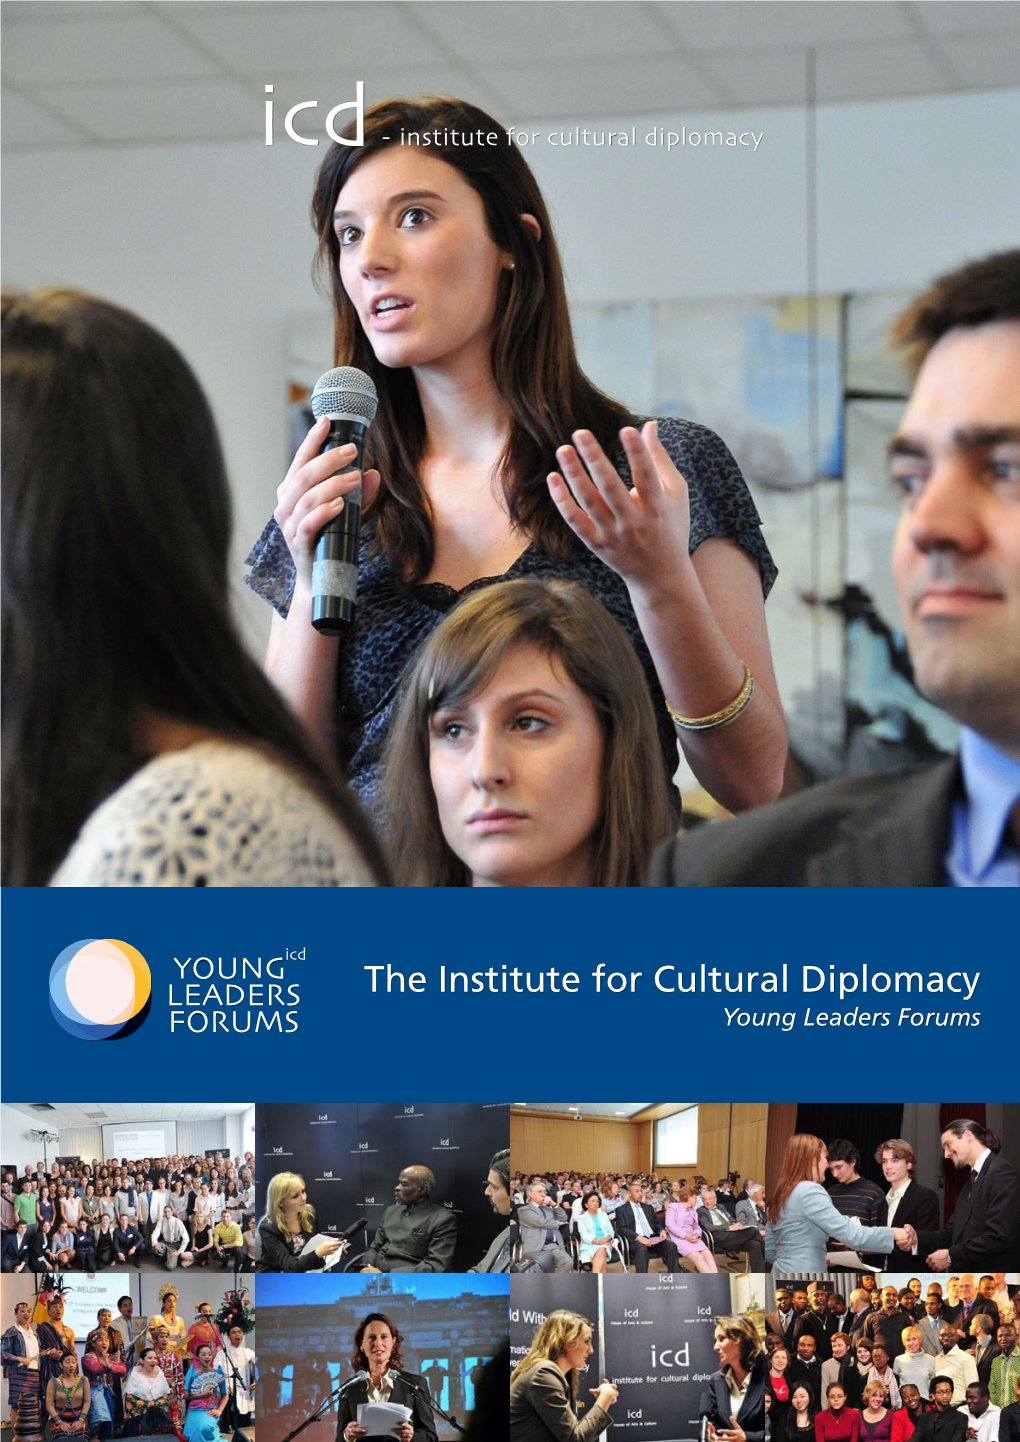 The Institute for Cultural Diplomacy LEADERS FORUMS Young Leaders Forums Icd - Institute for Cultural Diplomacy